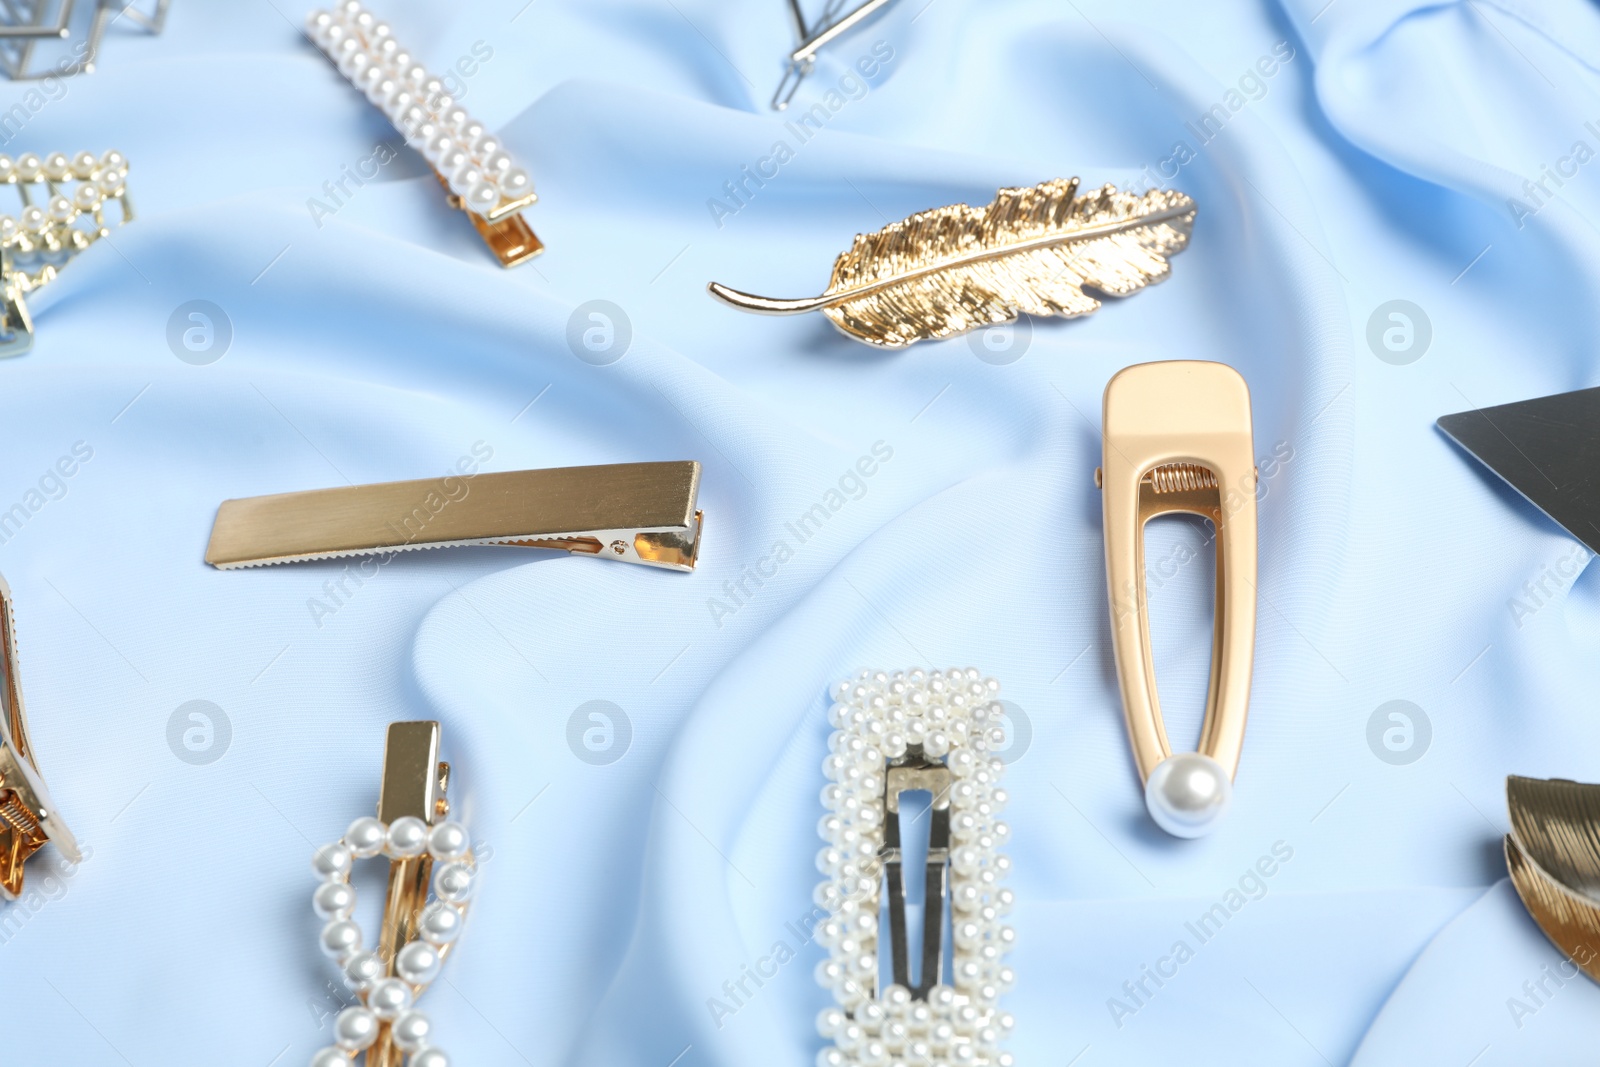 Photo of Stylish hair clips on light blue fabric, above view